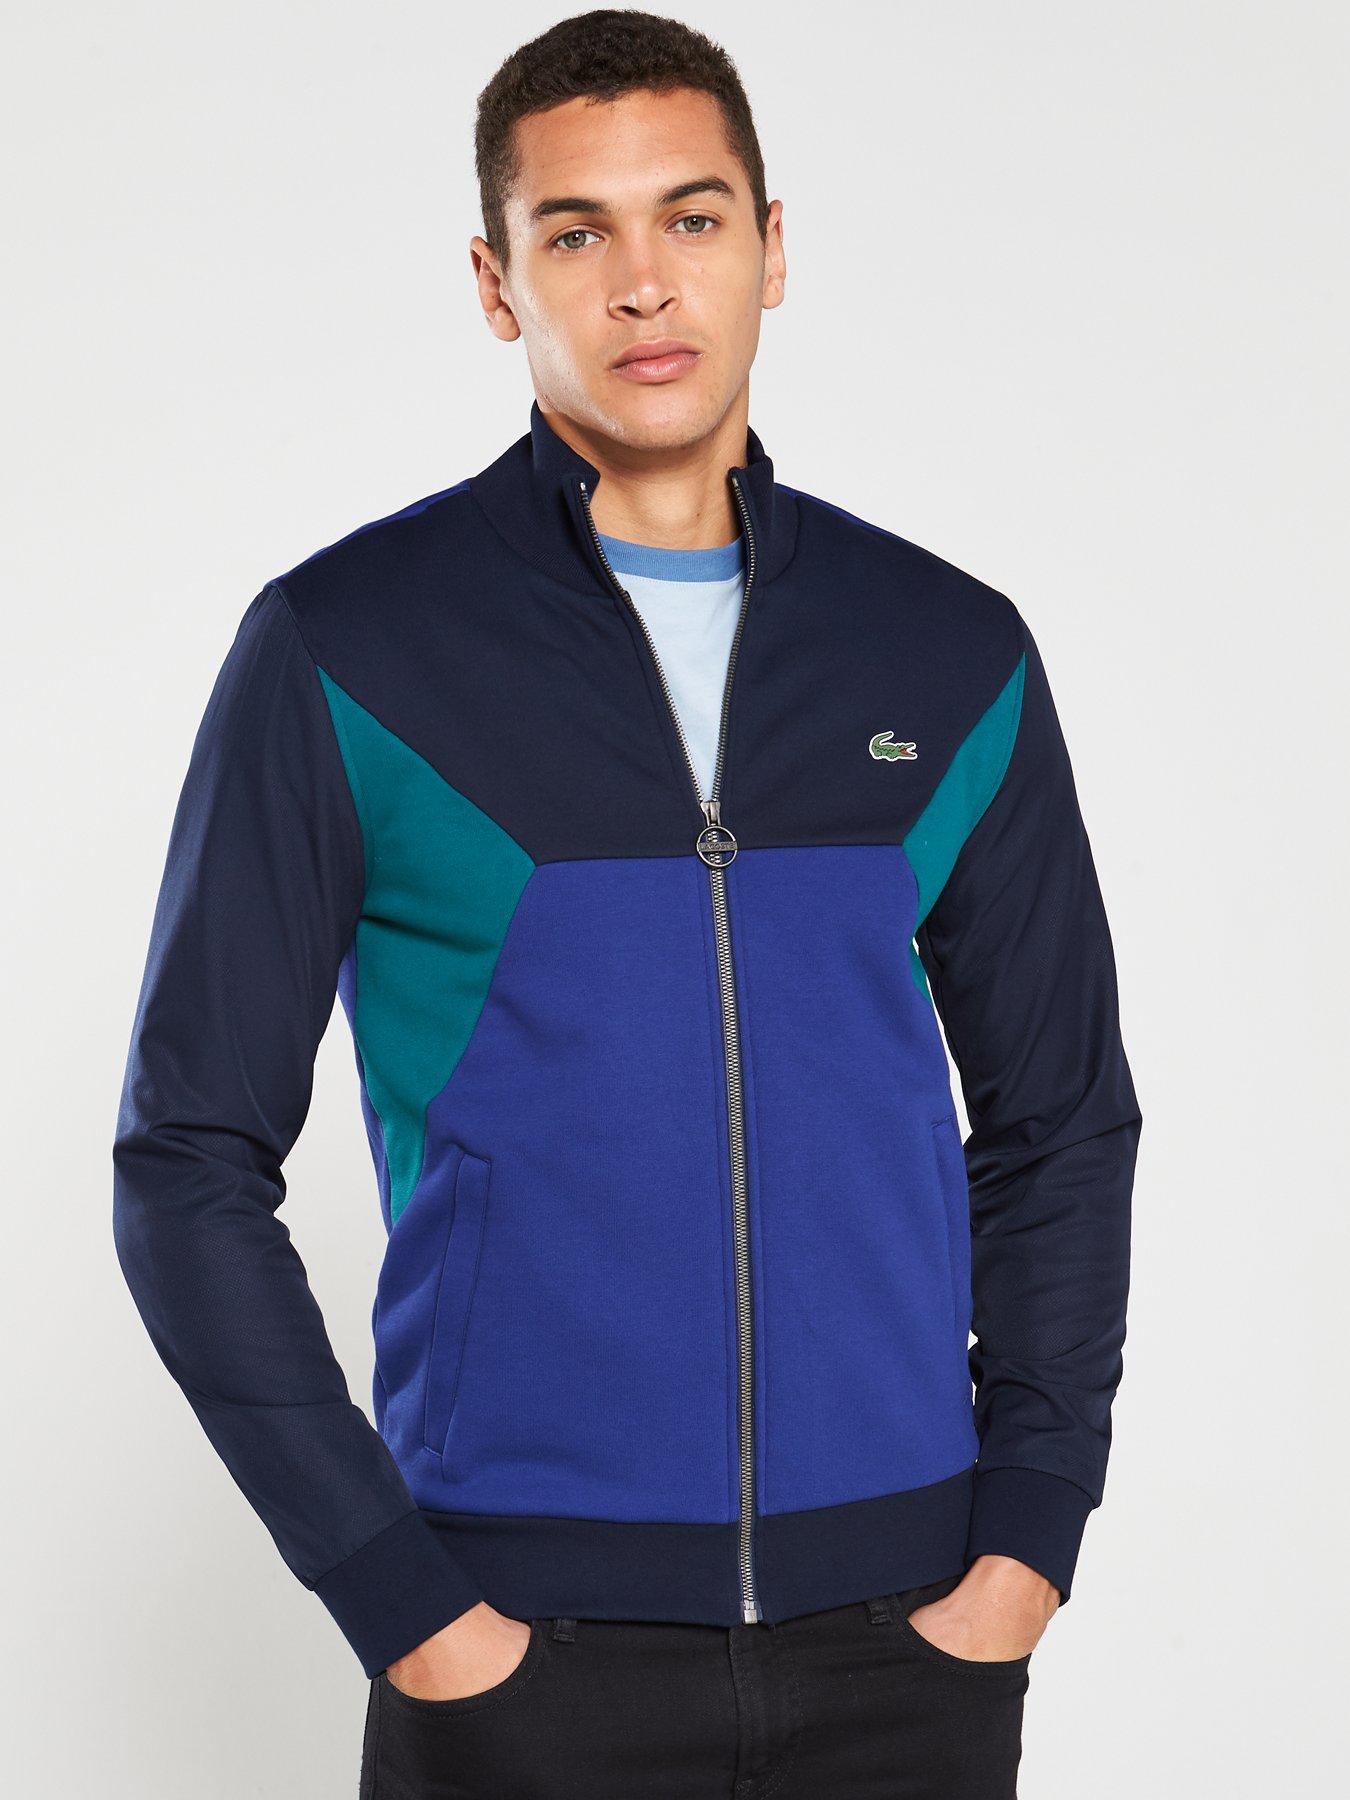 mens lacoste track top